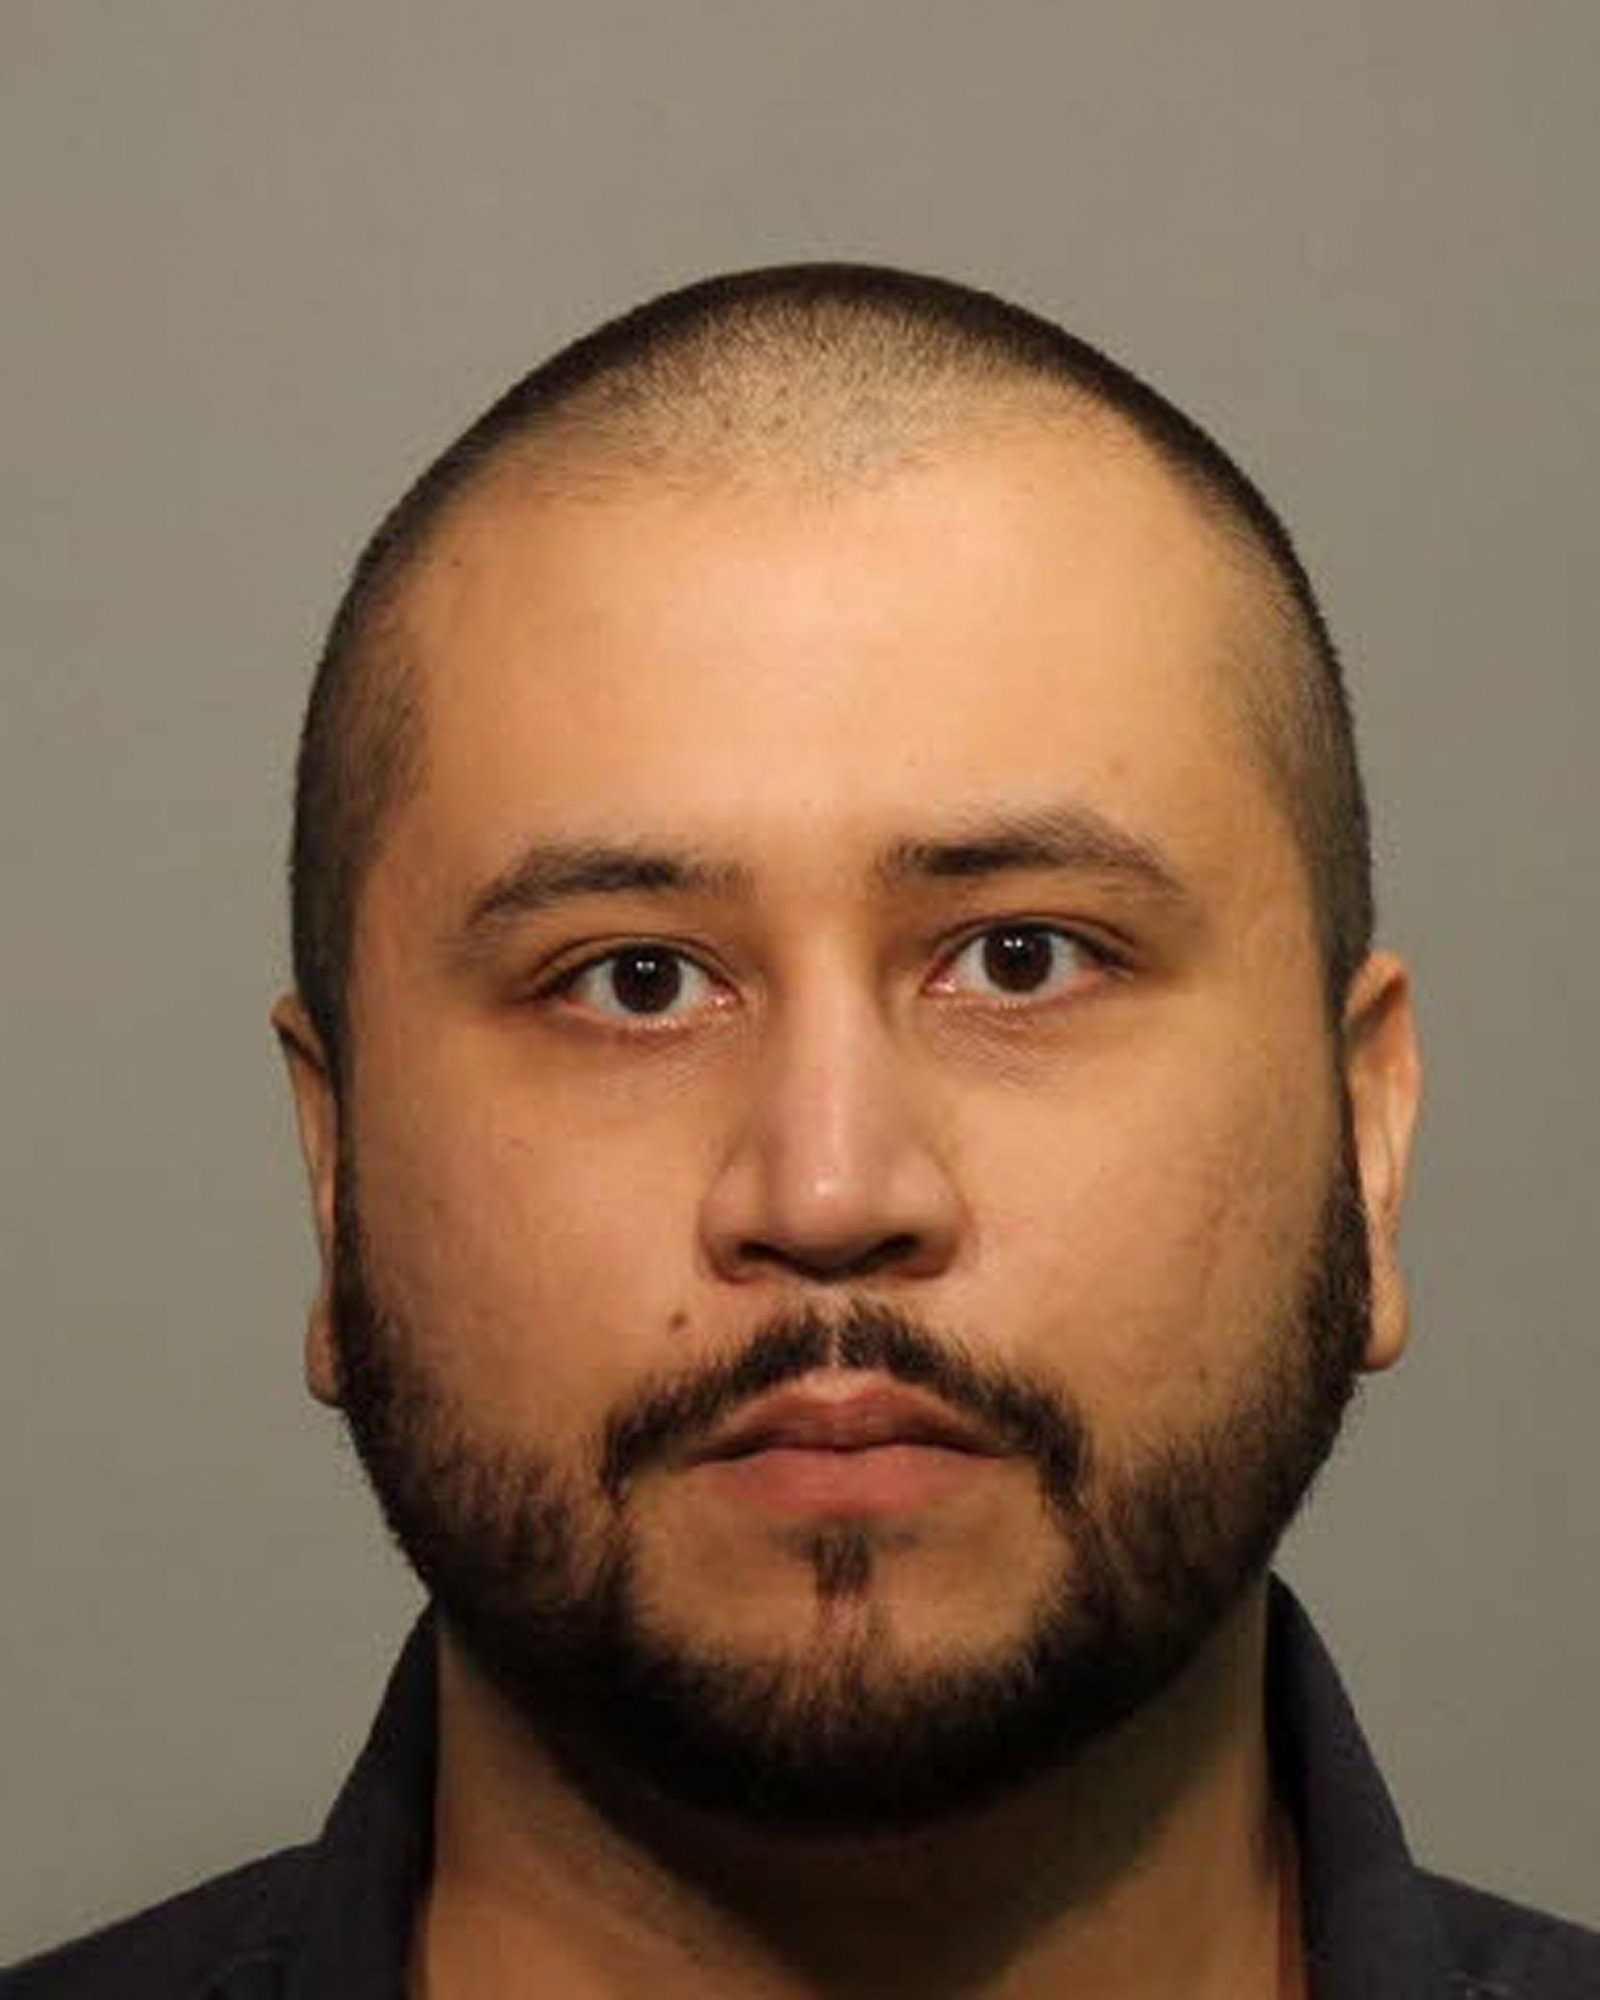 George Zimmerman poses for a mug shot photo after being arrested and booked into jail at the John Polk Correctional Facility in Sanford, Fla. on January 9, 2015. (Getty Images)